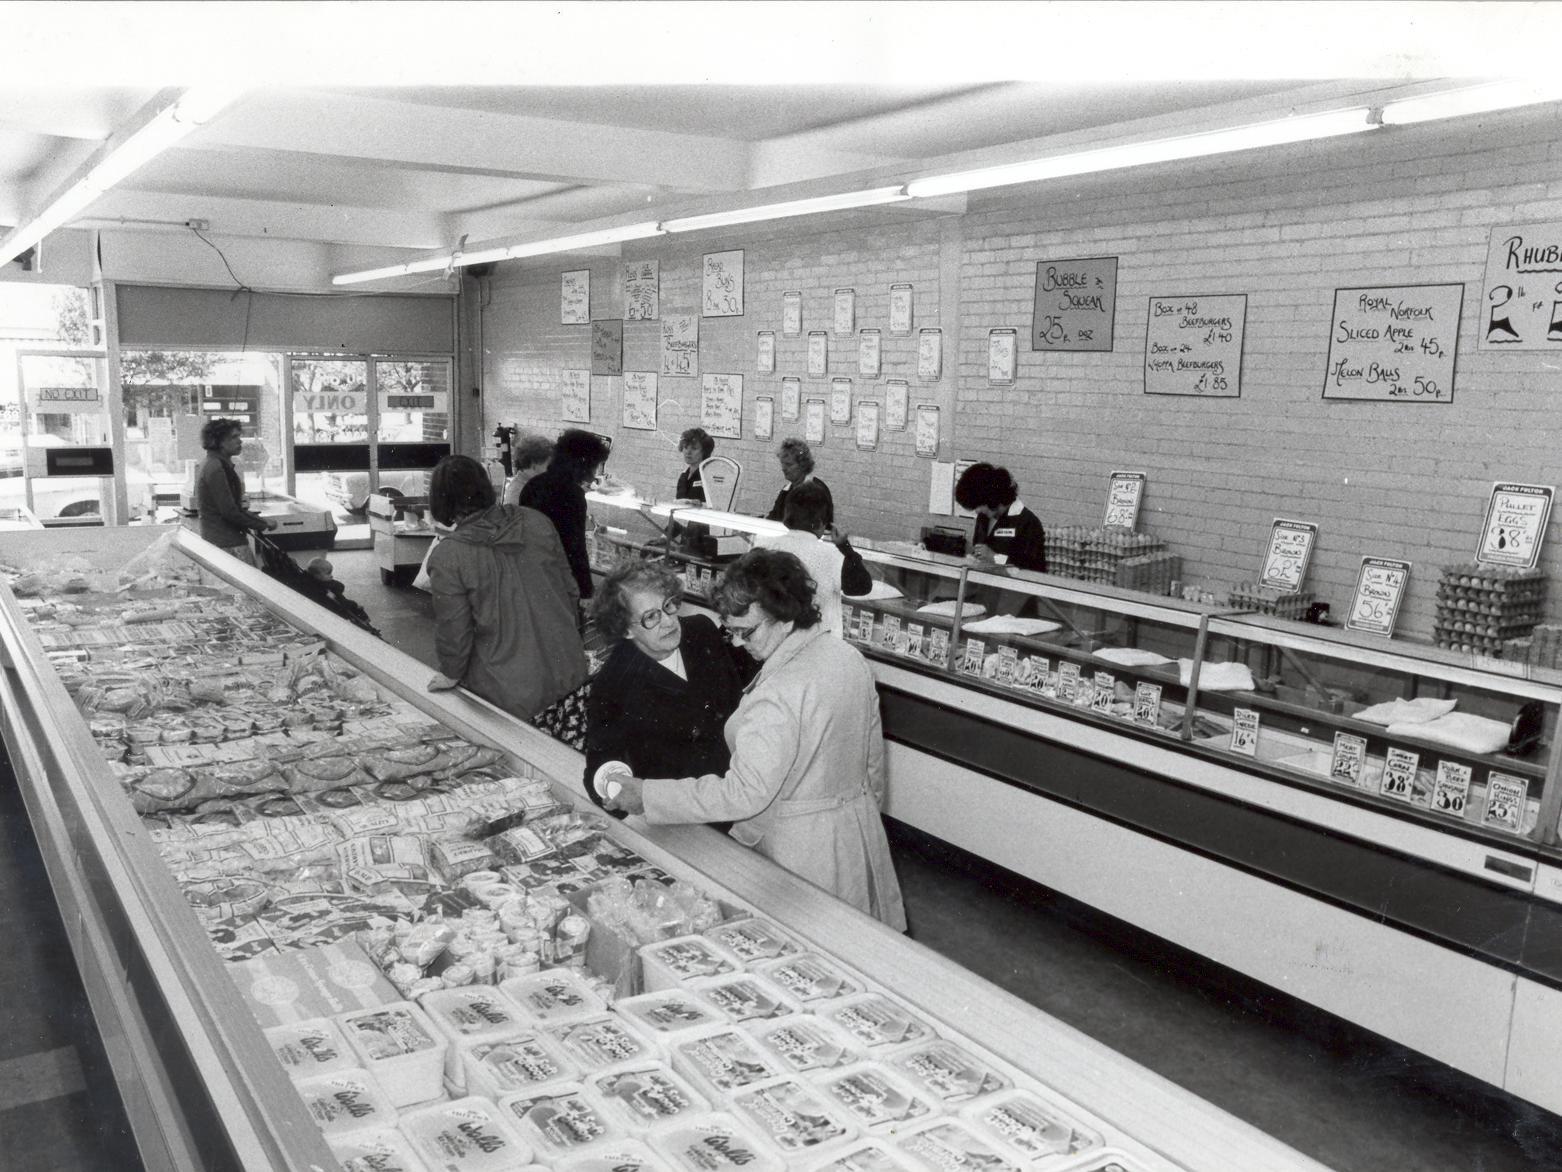 Jack Fulton Frozen Foods opened its 'Frozen Food Centre' on Town Street. The firm had been in the town for some time but it became obvious that the original premises were too small.